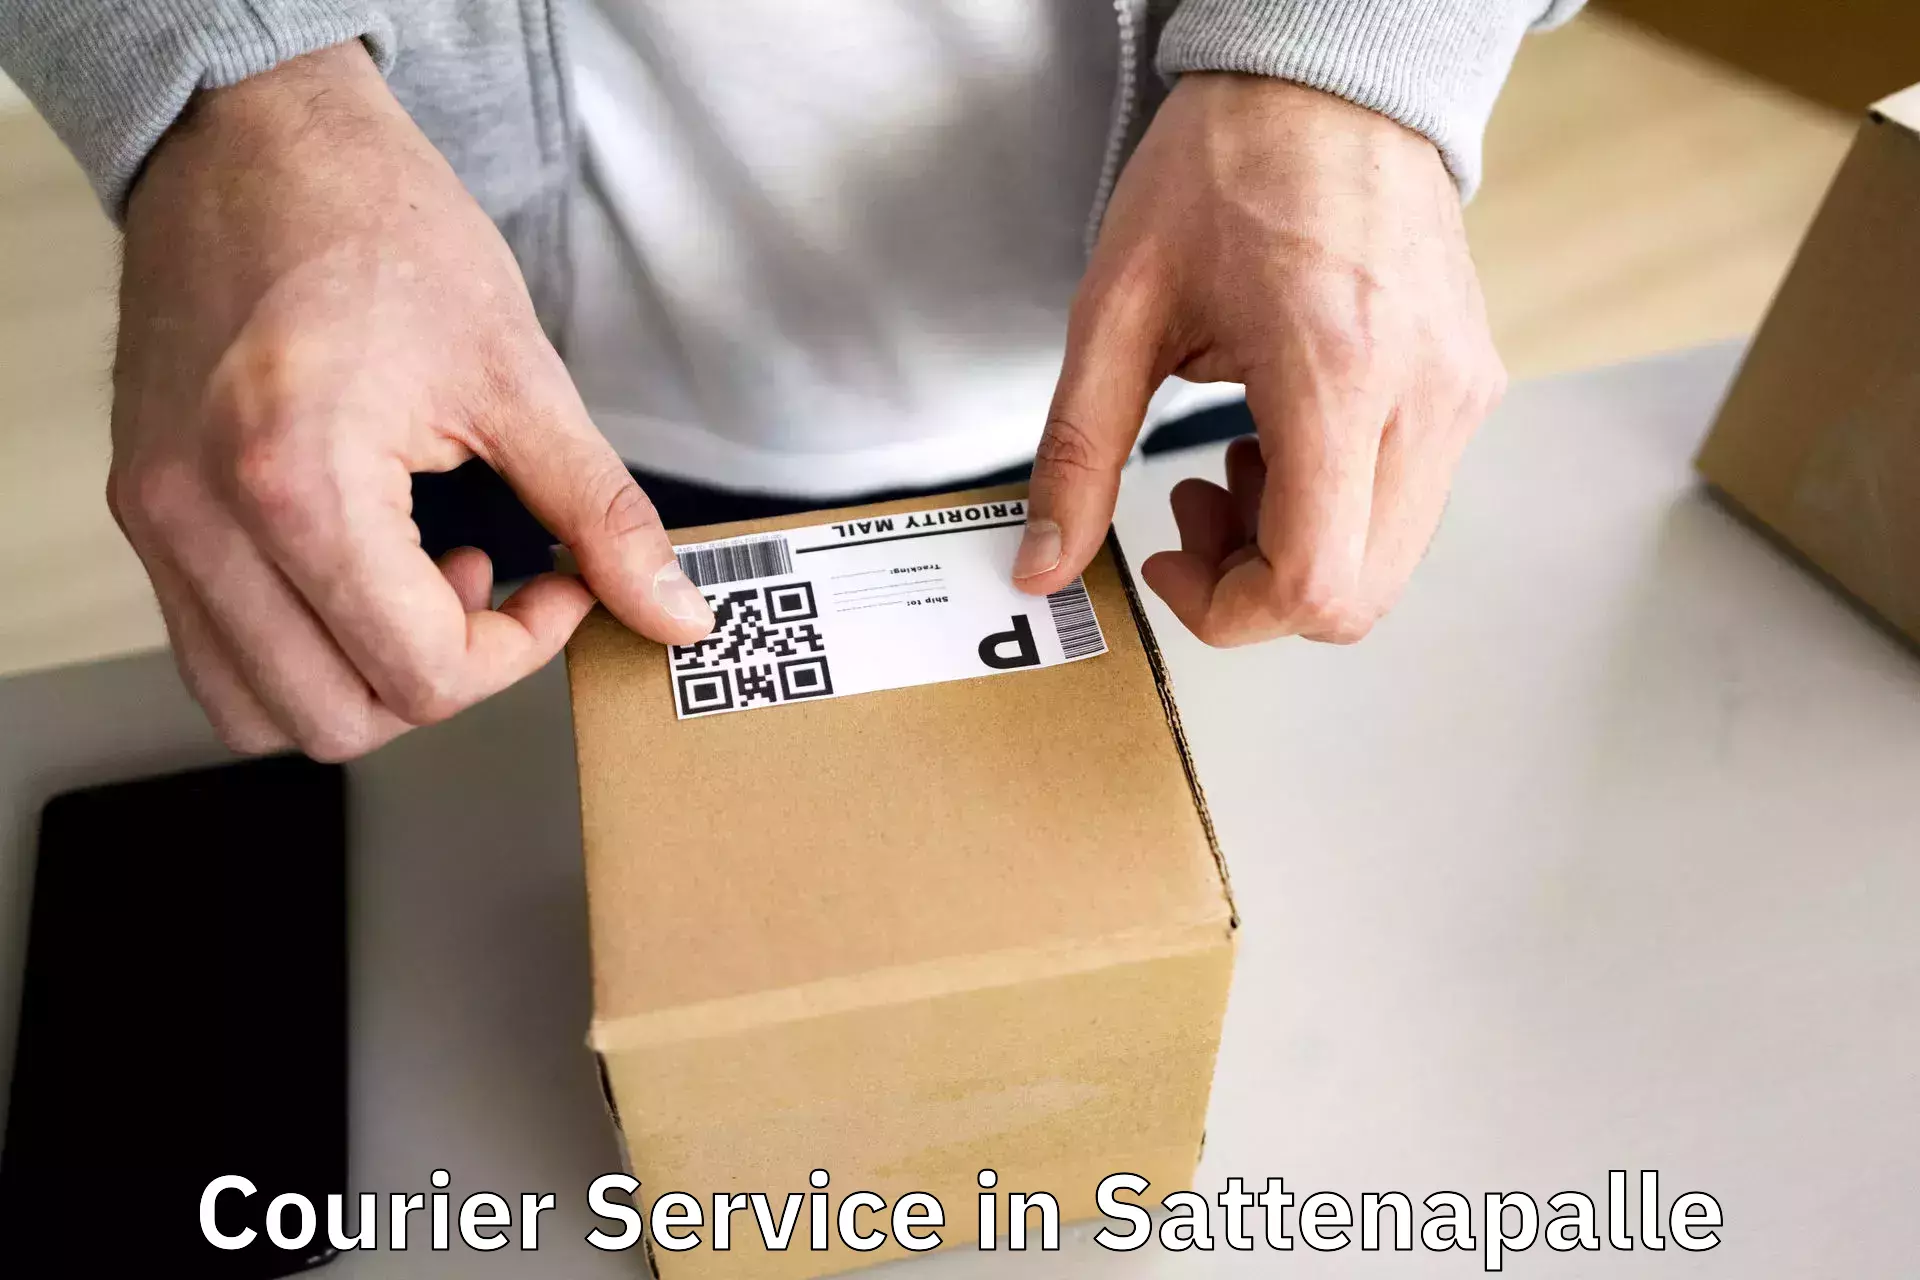 E-commerce shipping in Sattenapalle